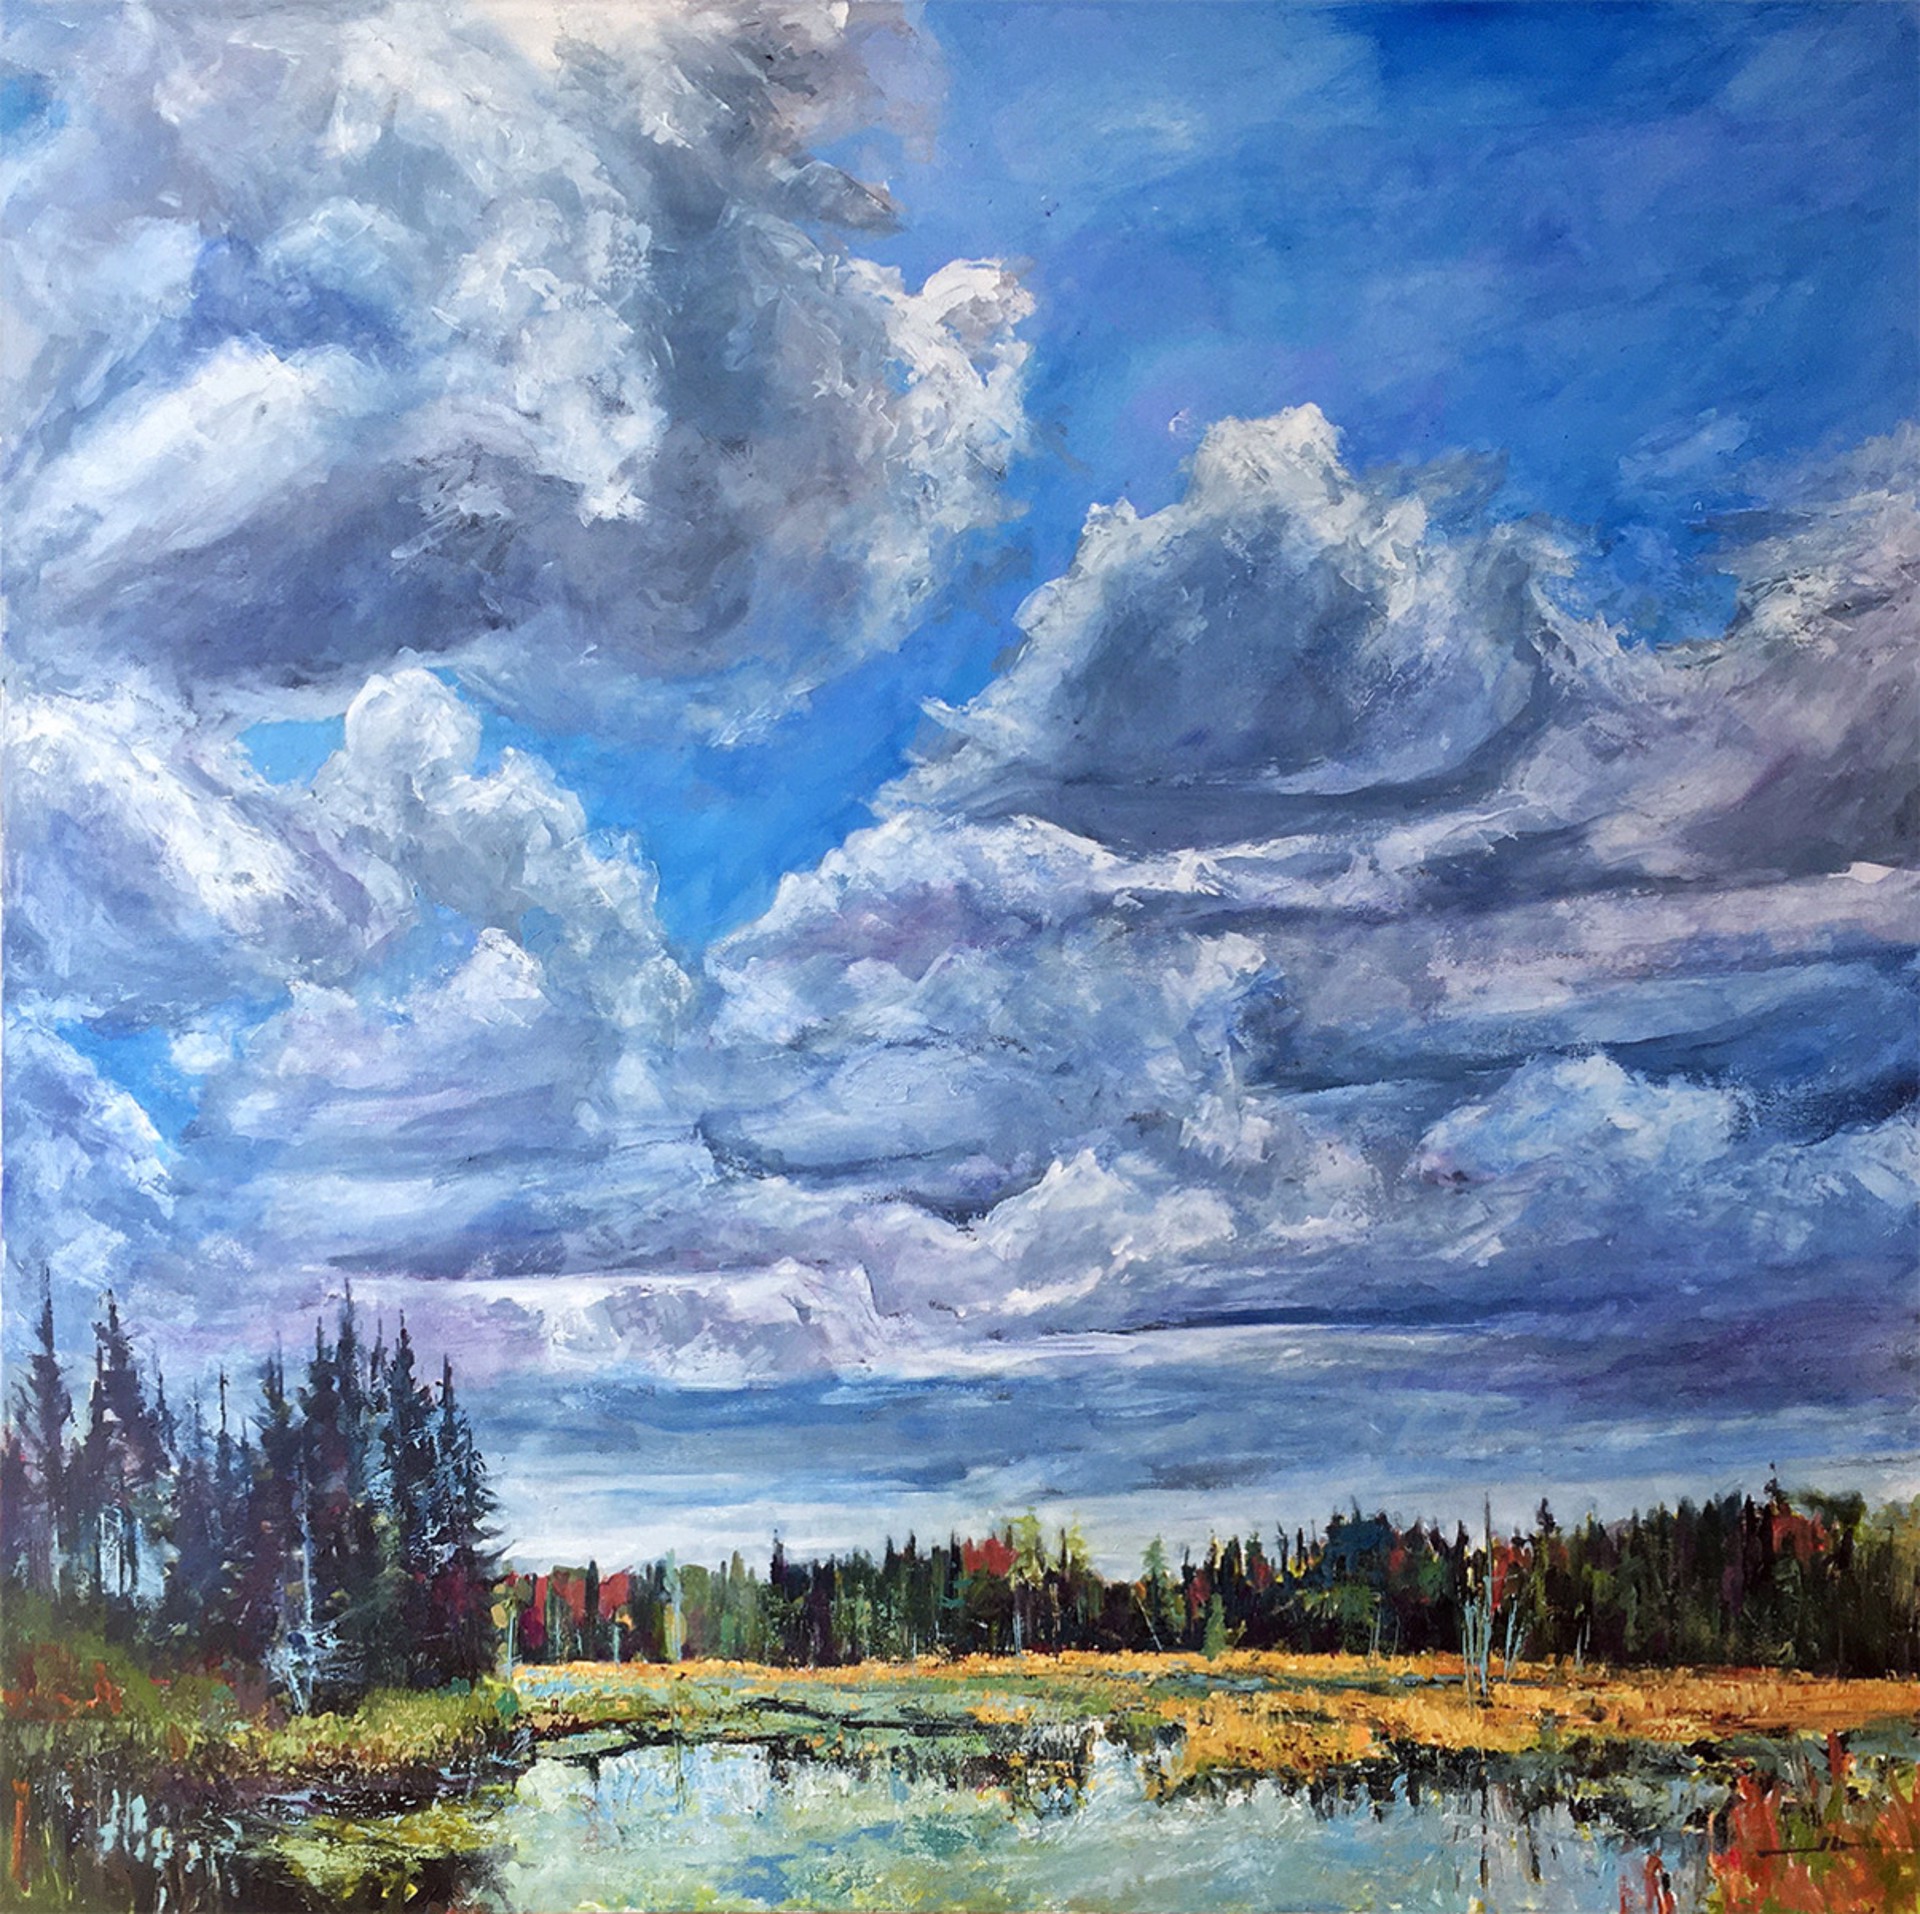 Clouds over Water by James Goodliff